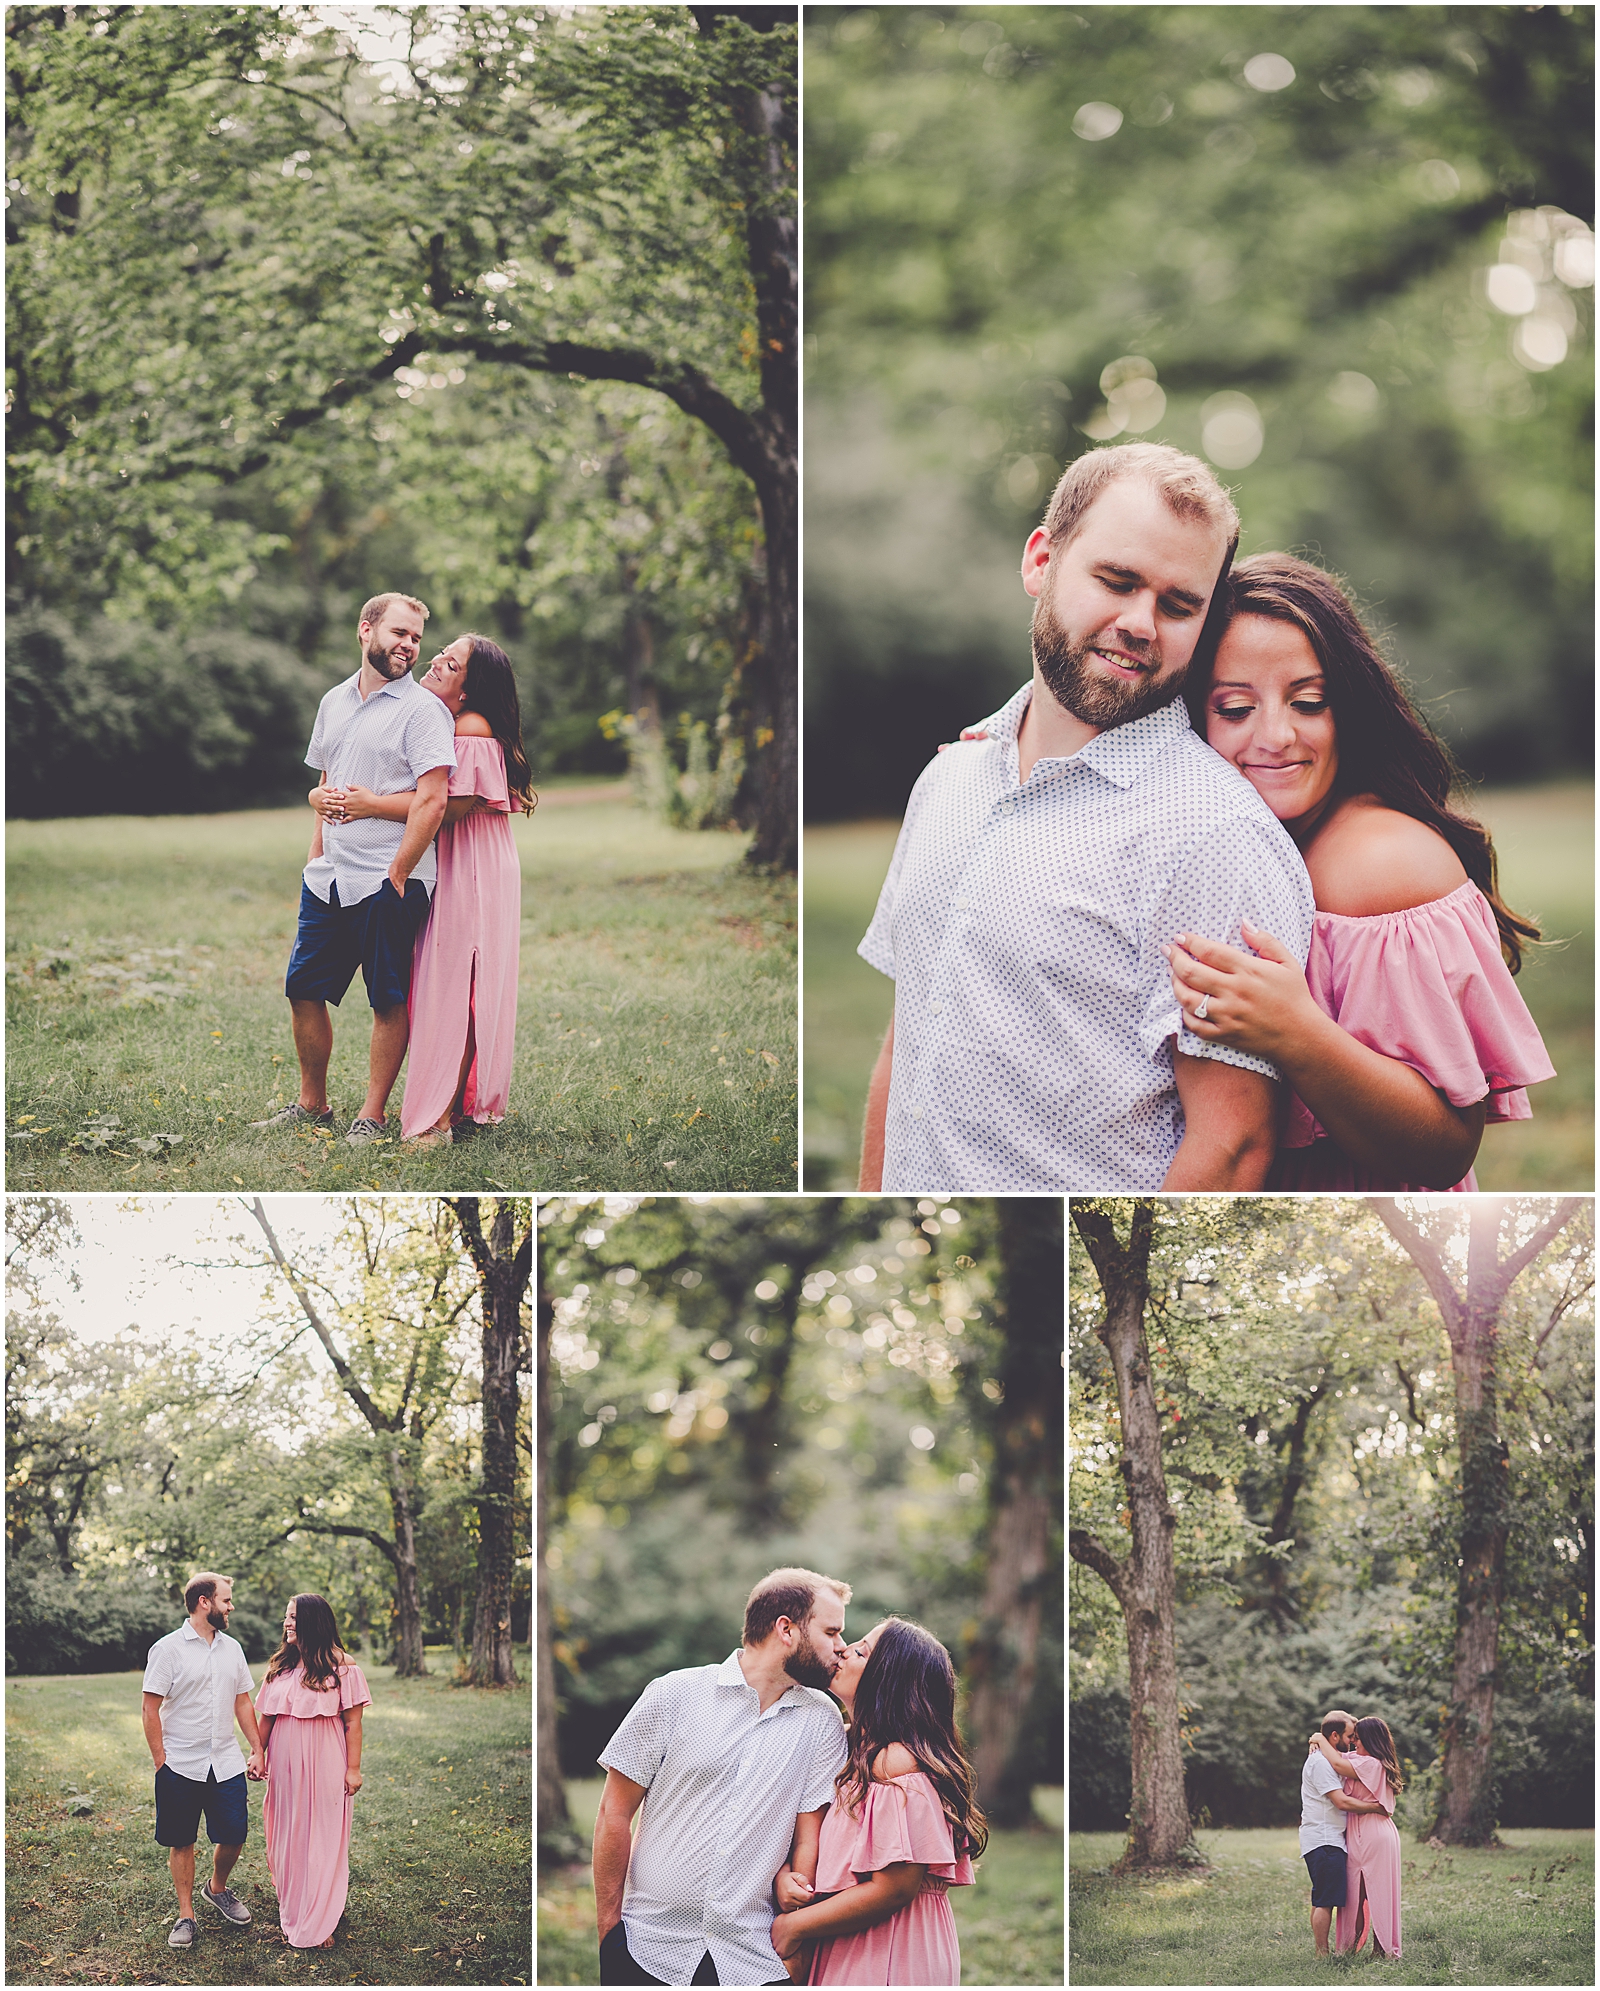 Daniela and Andrew's summer engagement photos at Kankakee River State Park with Chicagoland wedding photographer Kara Evans Photographer.